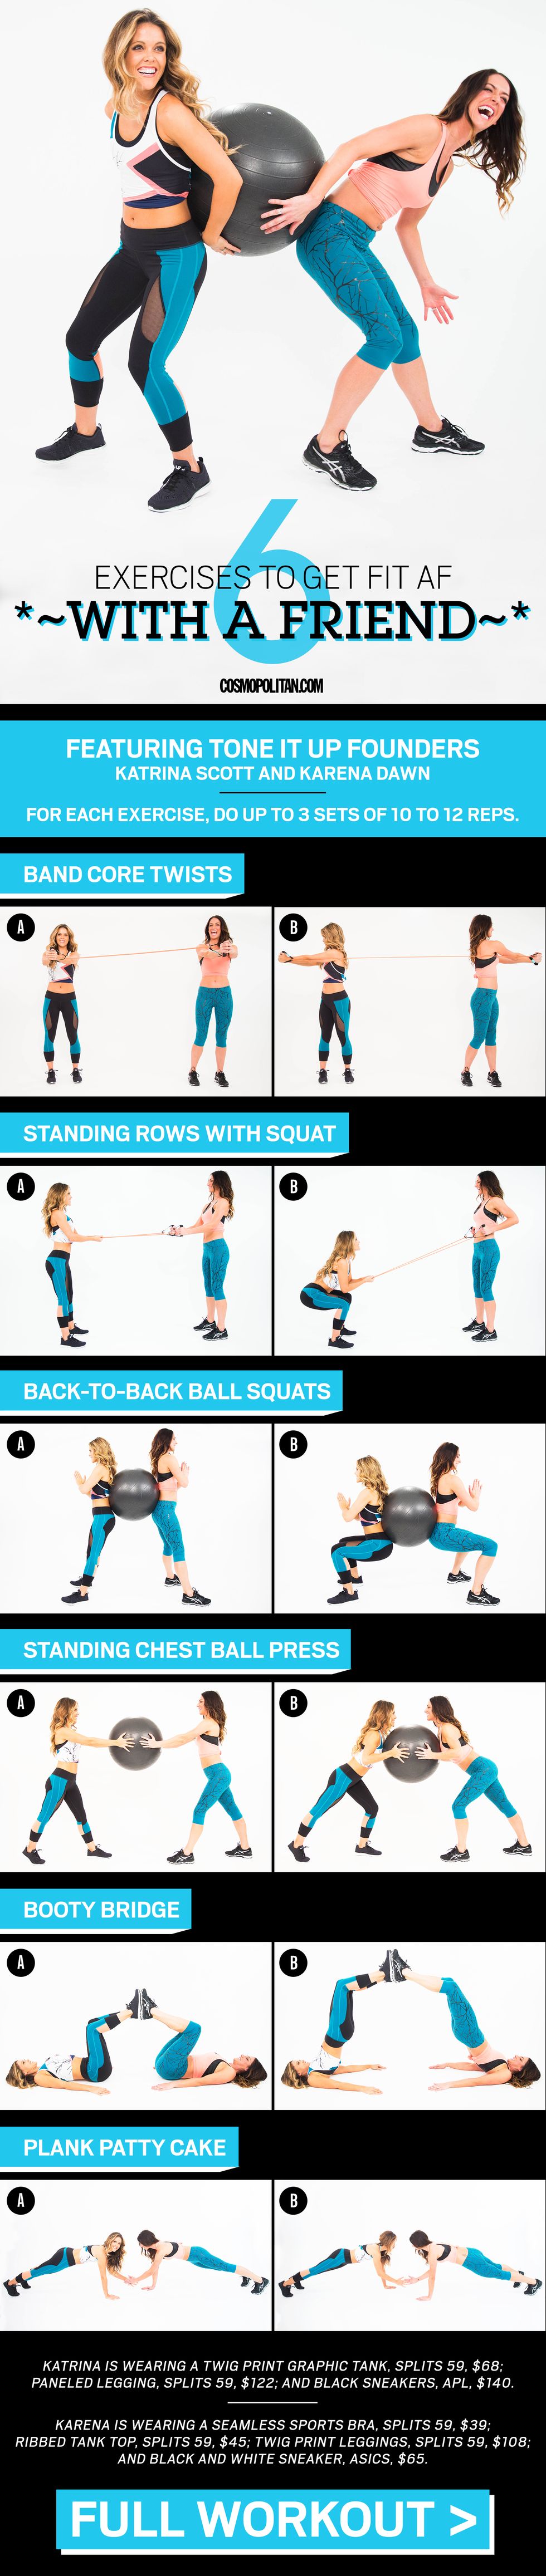 Get Fit in 10 With These Booty-Toning Exercises